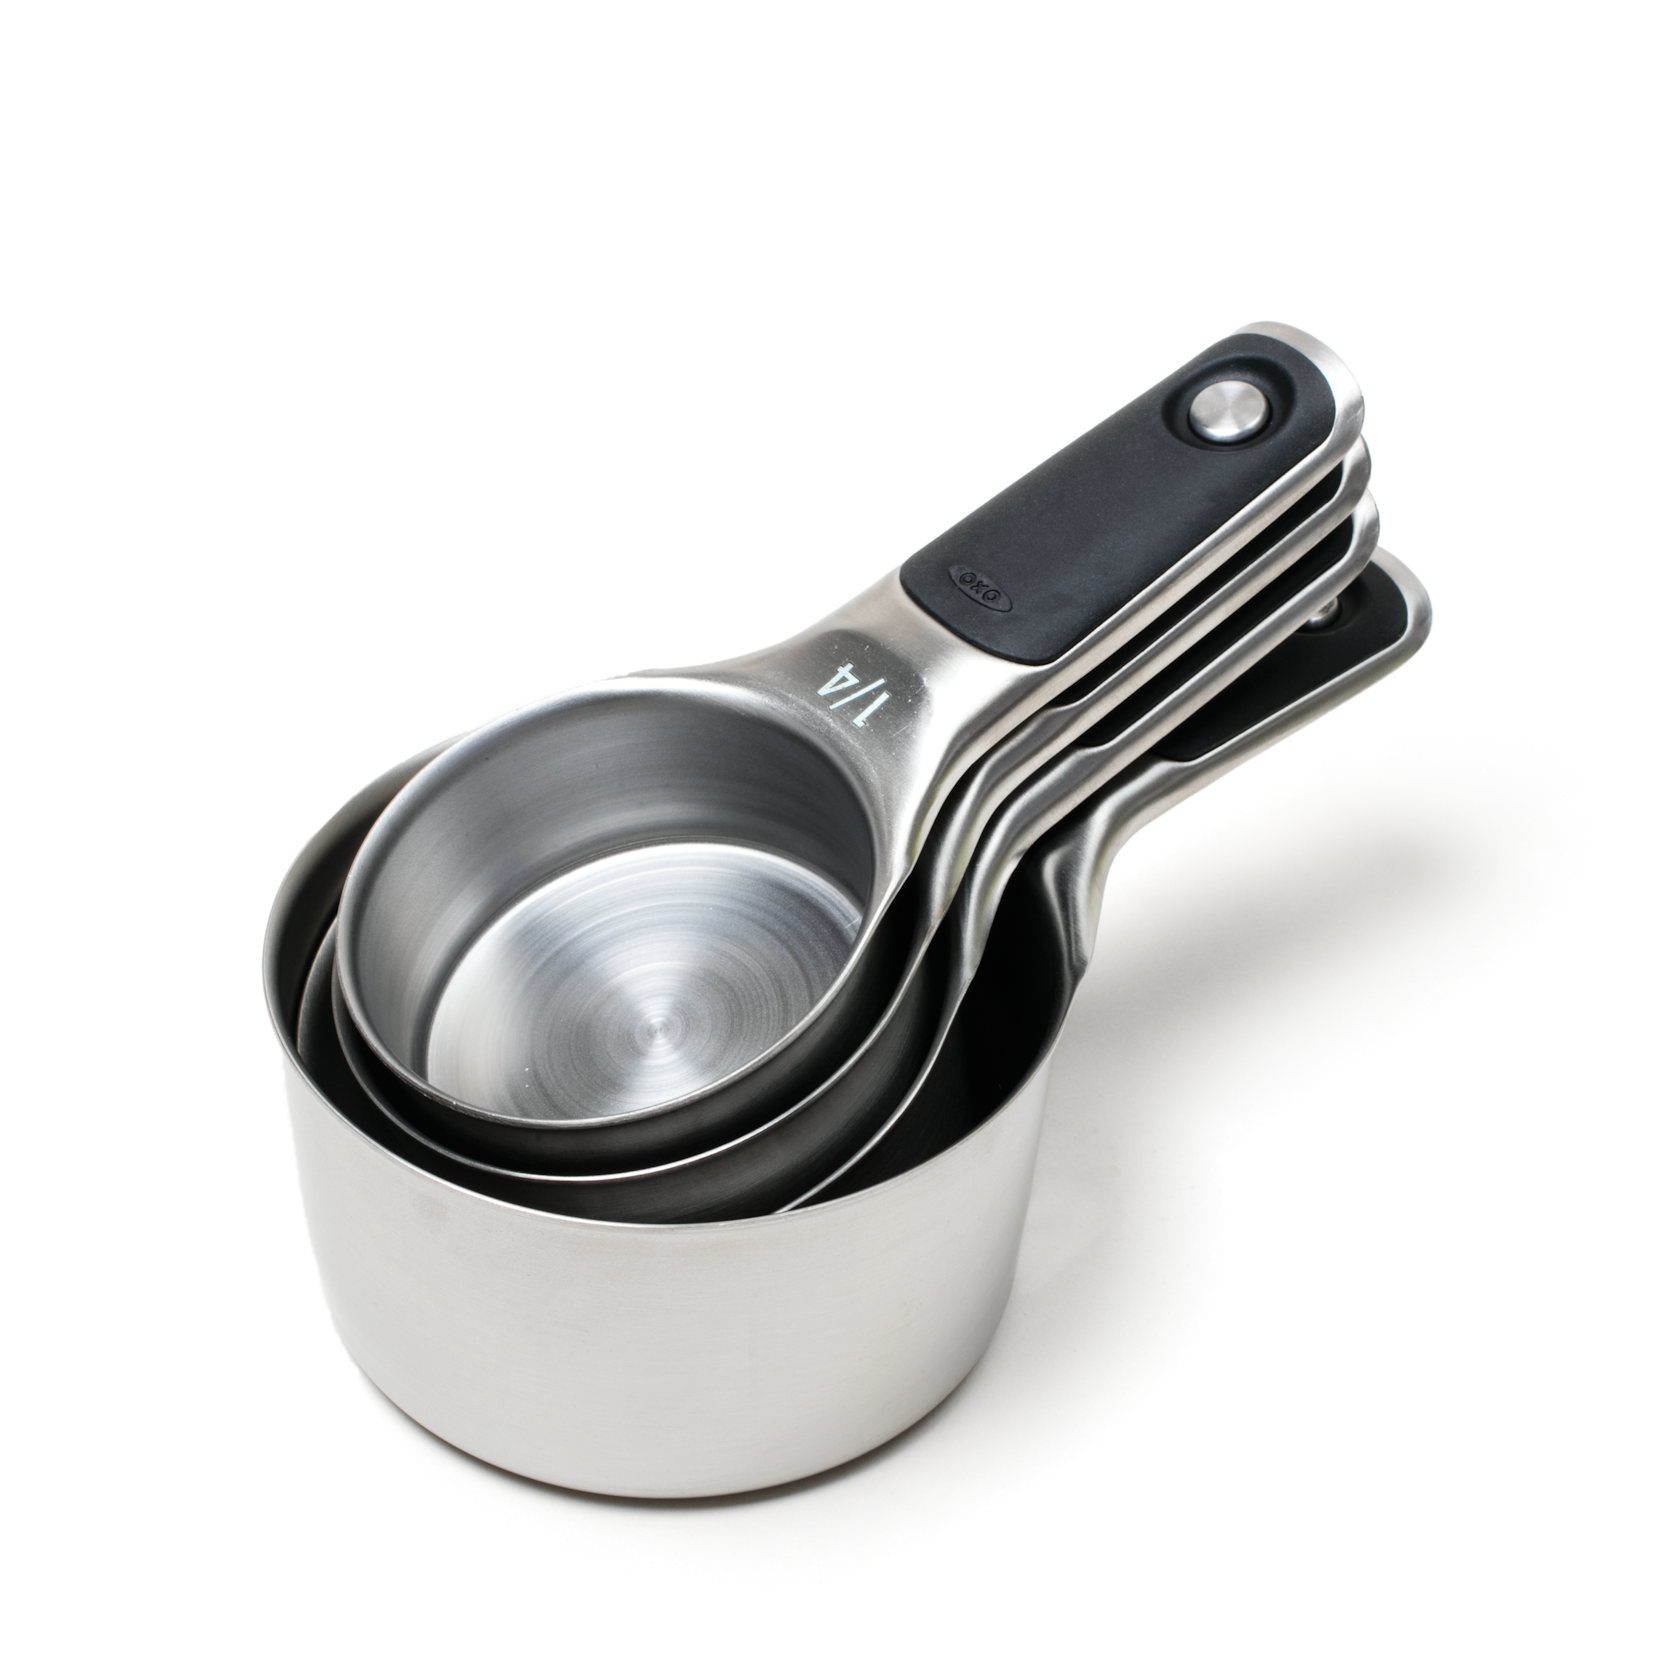 Dry Measuring Cups Png - Dry Measuring Cups Png Hdpng.com 1656, Transparent background PNG HD thumbnail